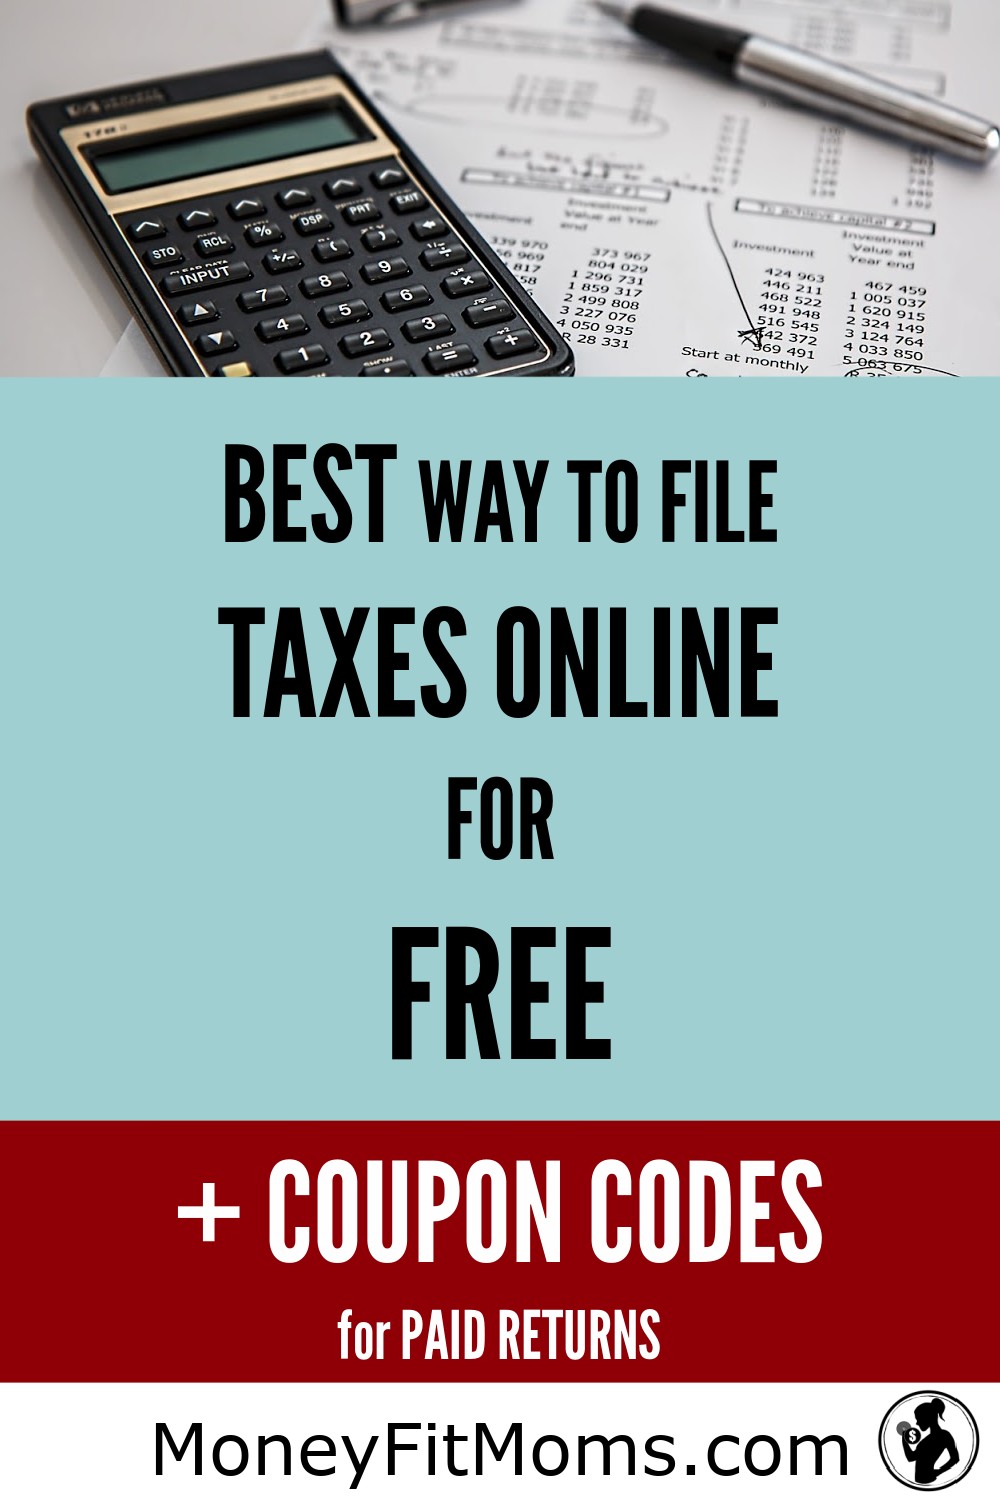 Best way to file taxes online for free - coupon codes (2)